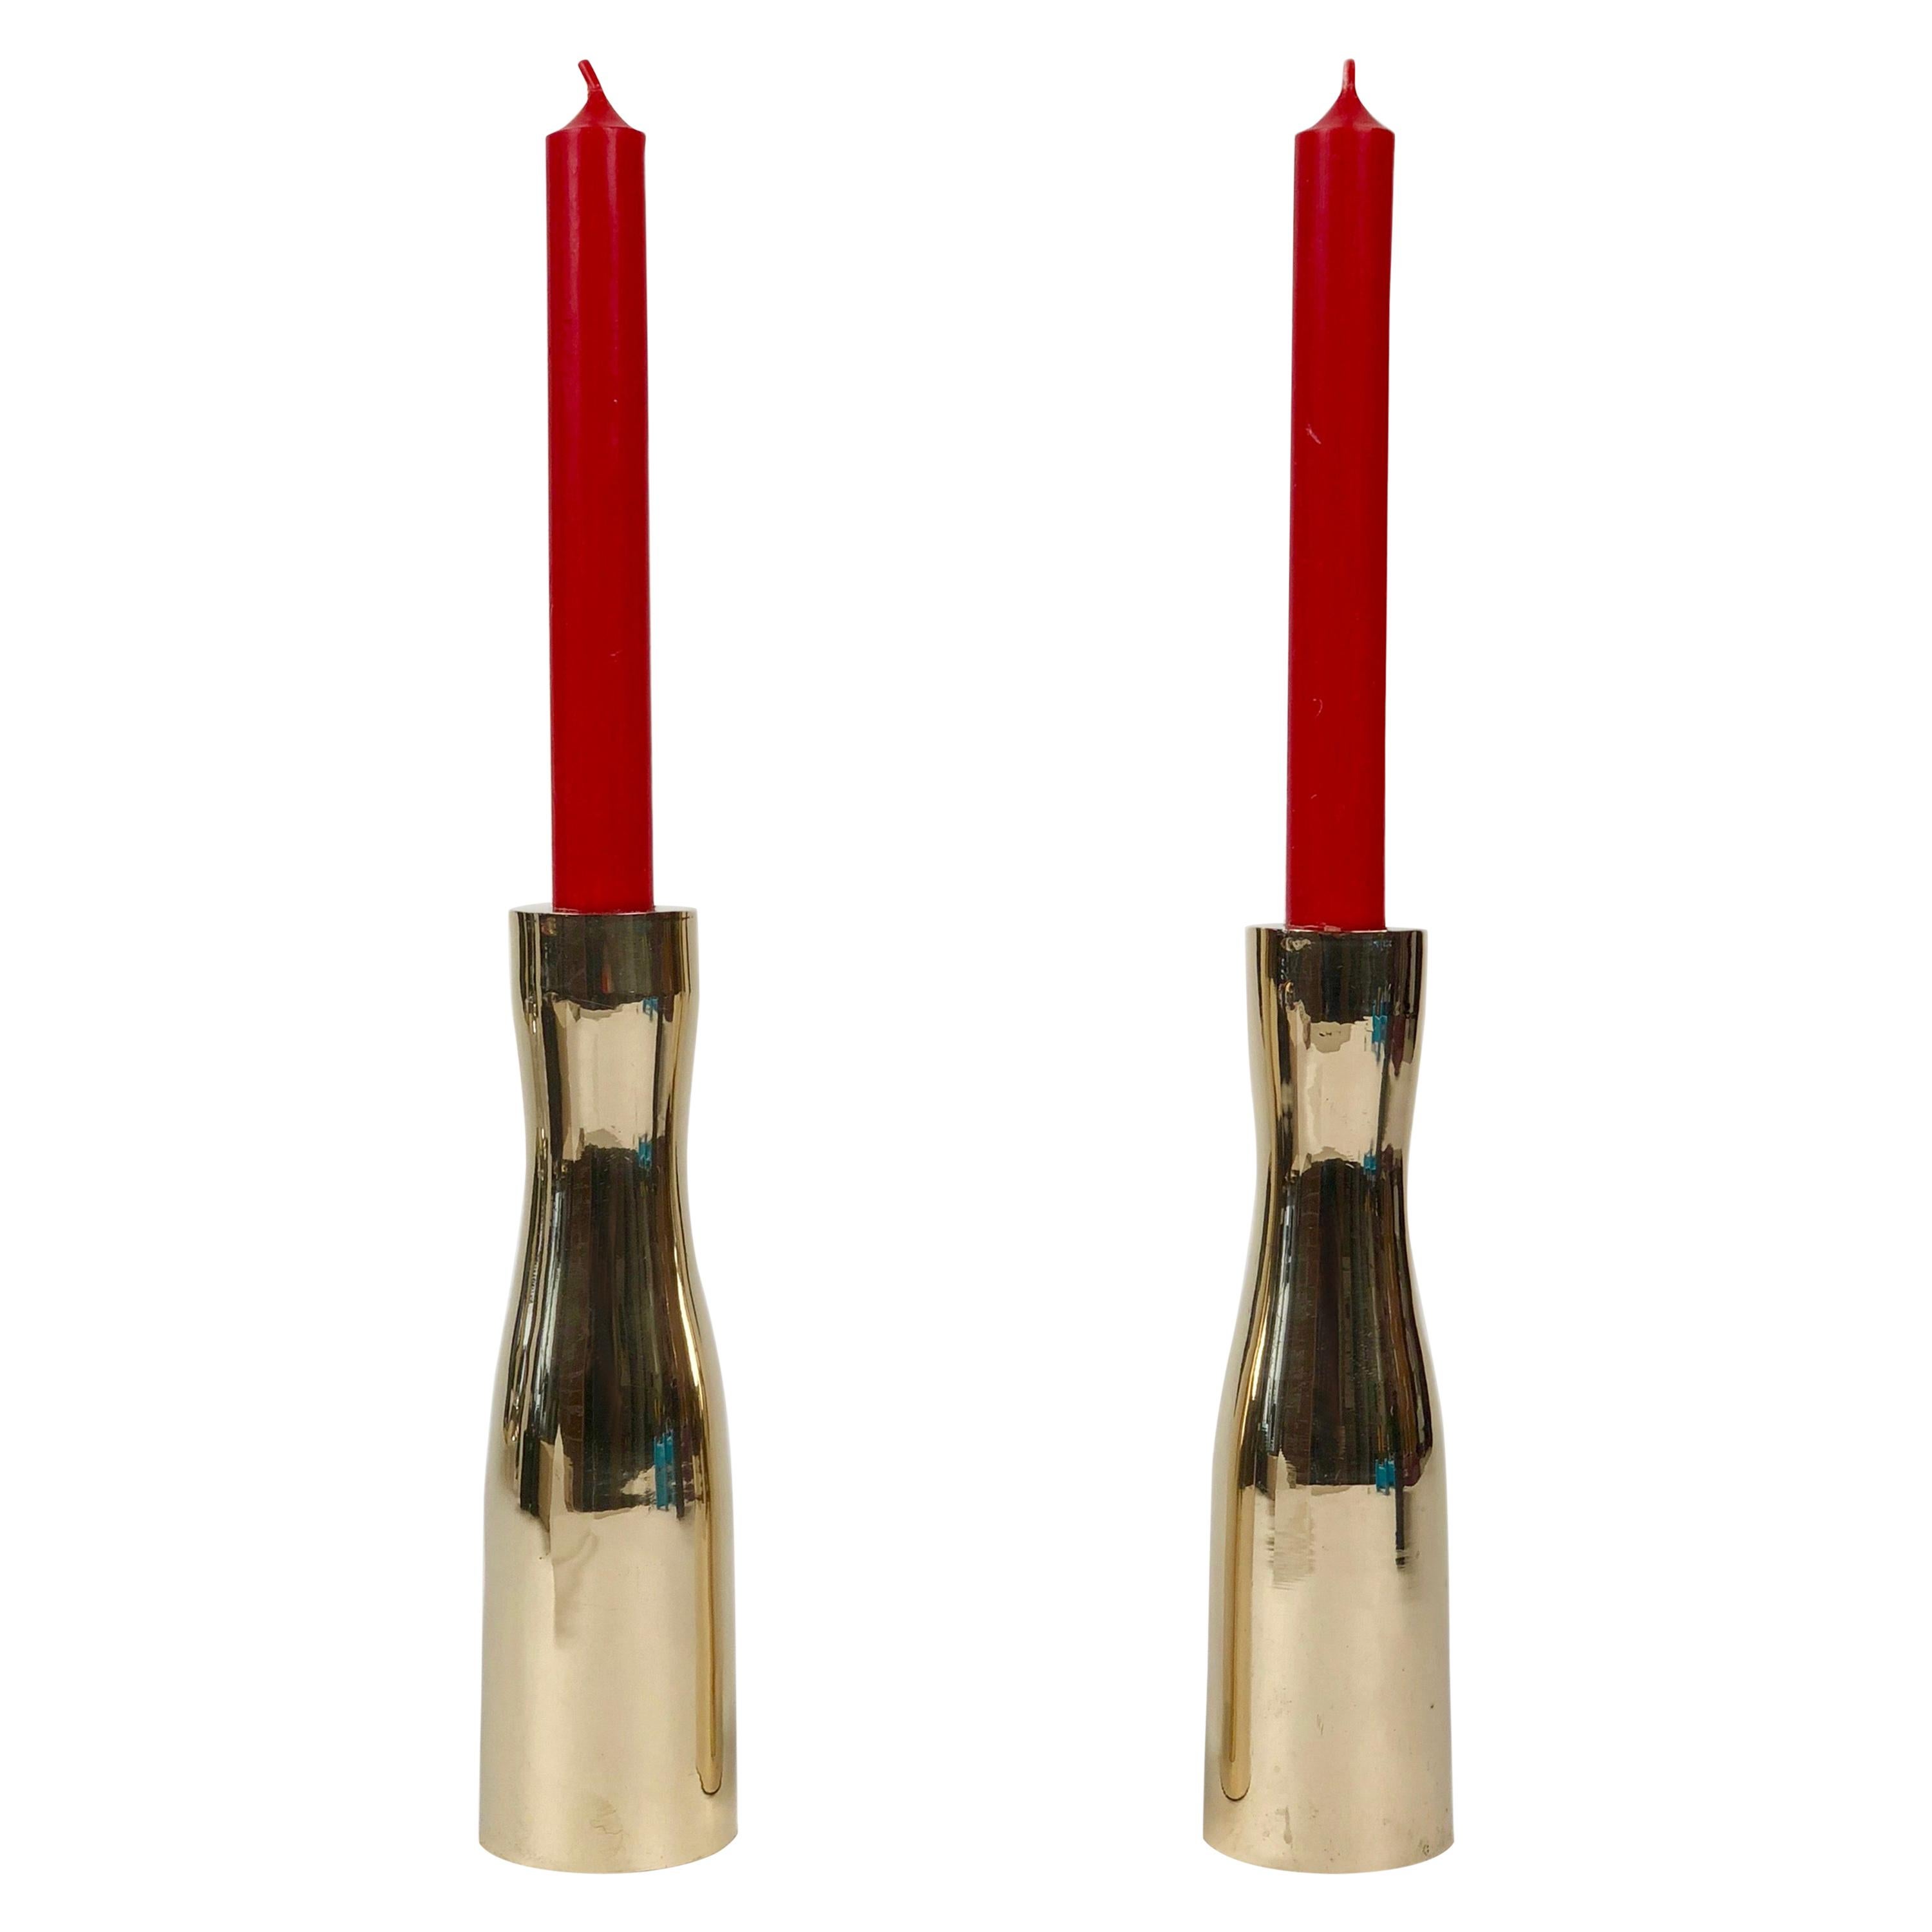 Midcentury Brass Candleholders from the USA